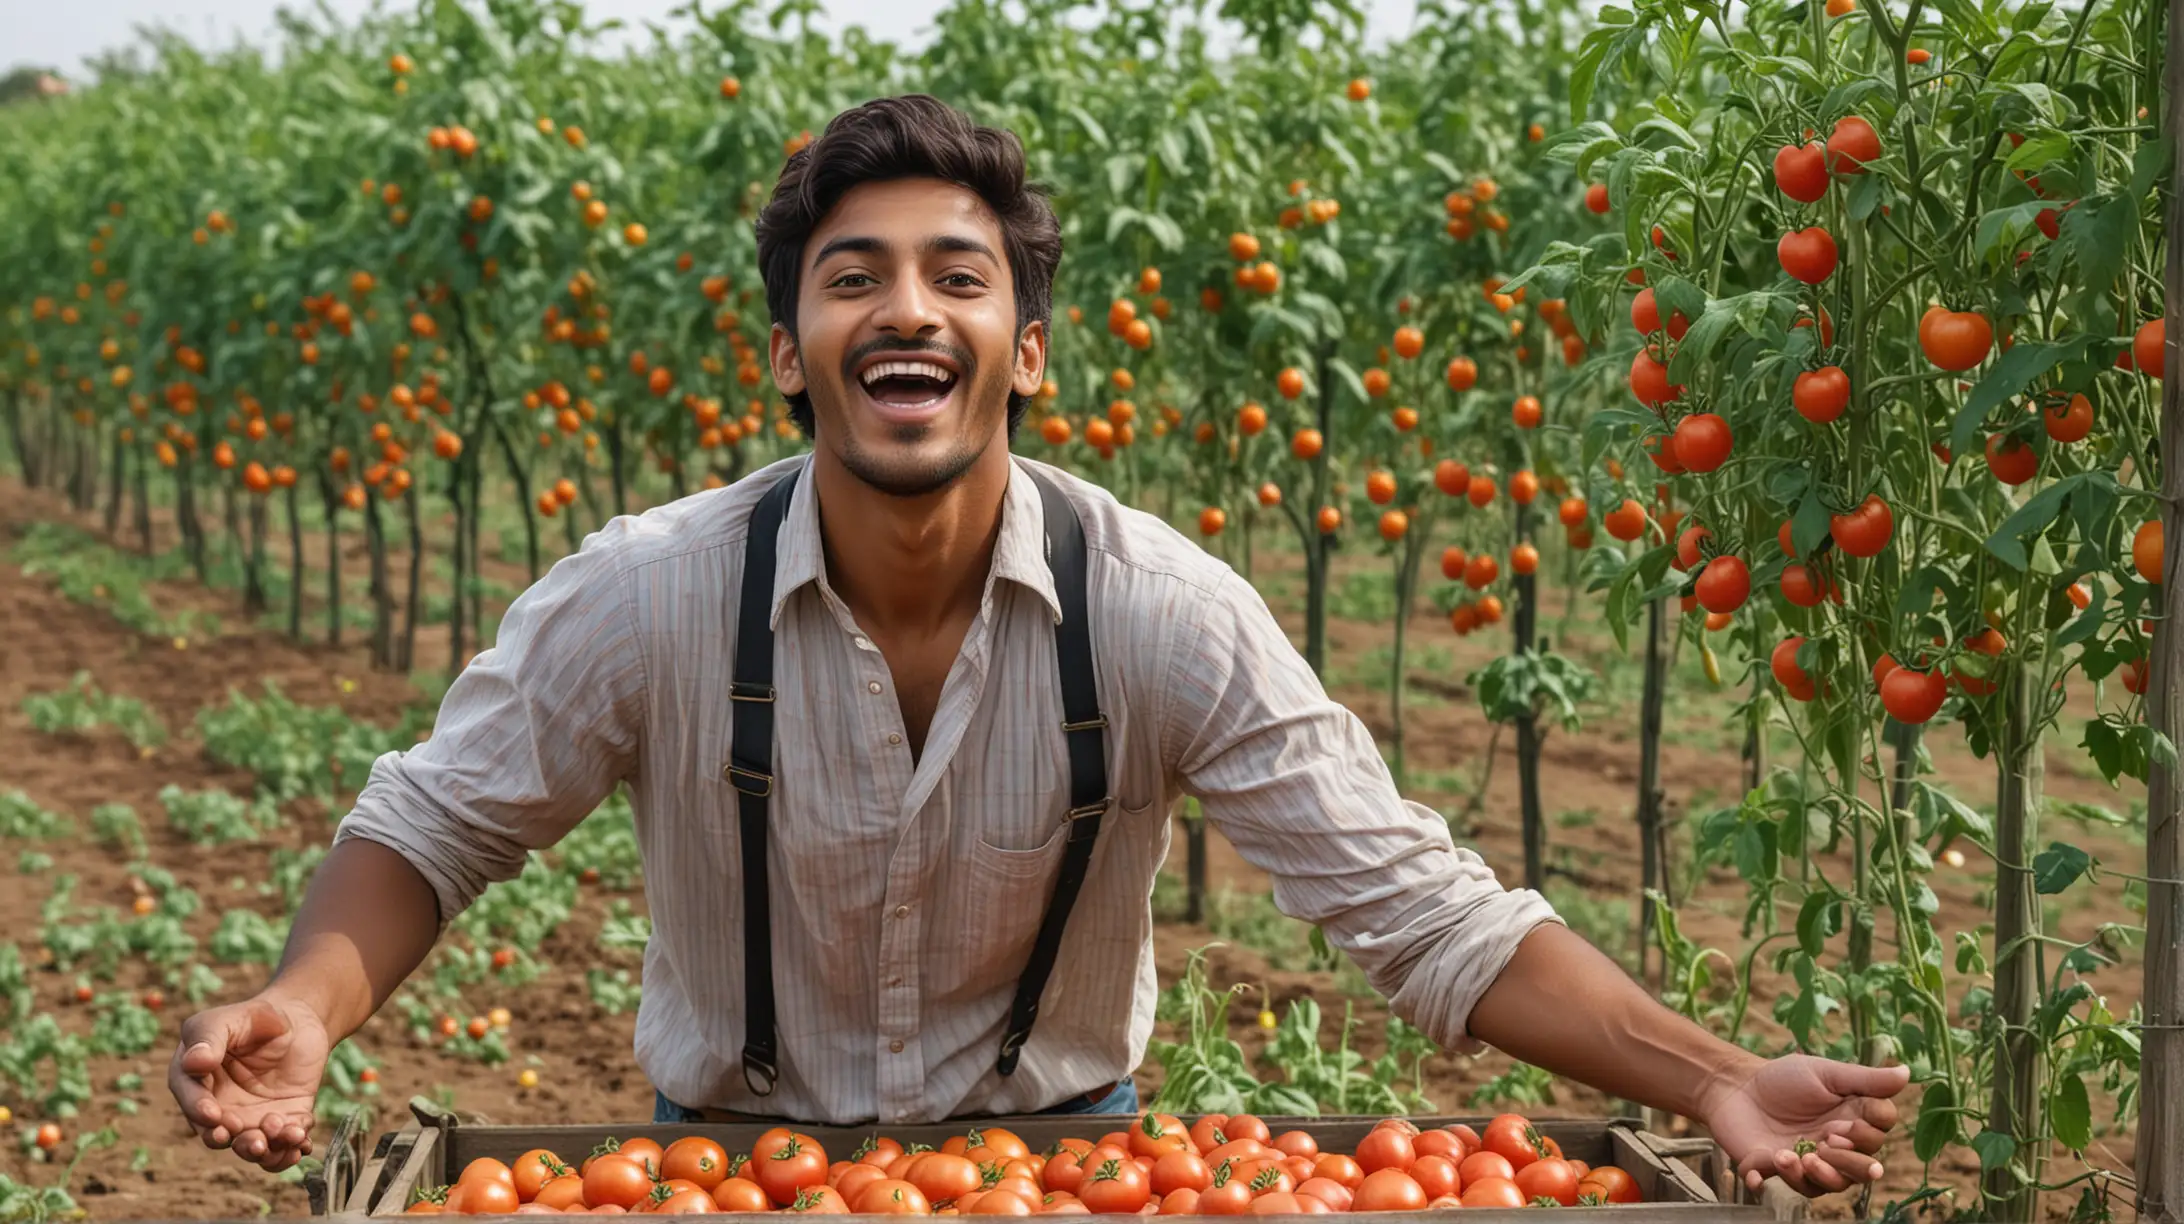 generate a thumbnail for a youtube video showing success story of a young Indian happy farmer jumping with joy in a tomato field with bountiful harvest and  10 carets full of tomatoes and surprised look on the face